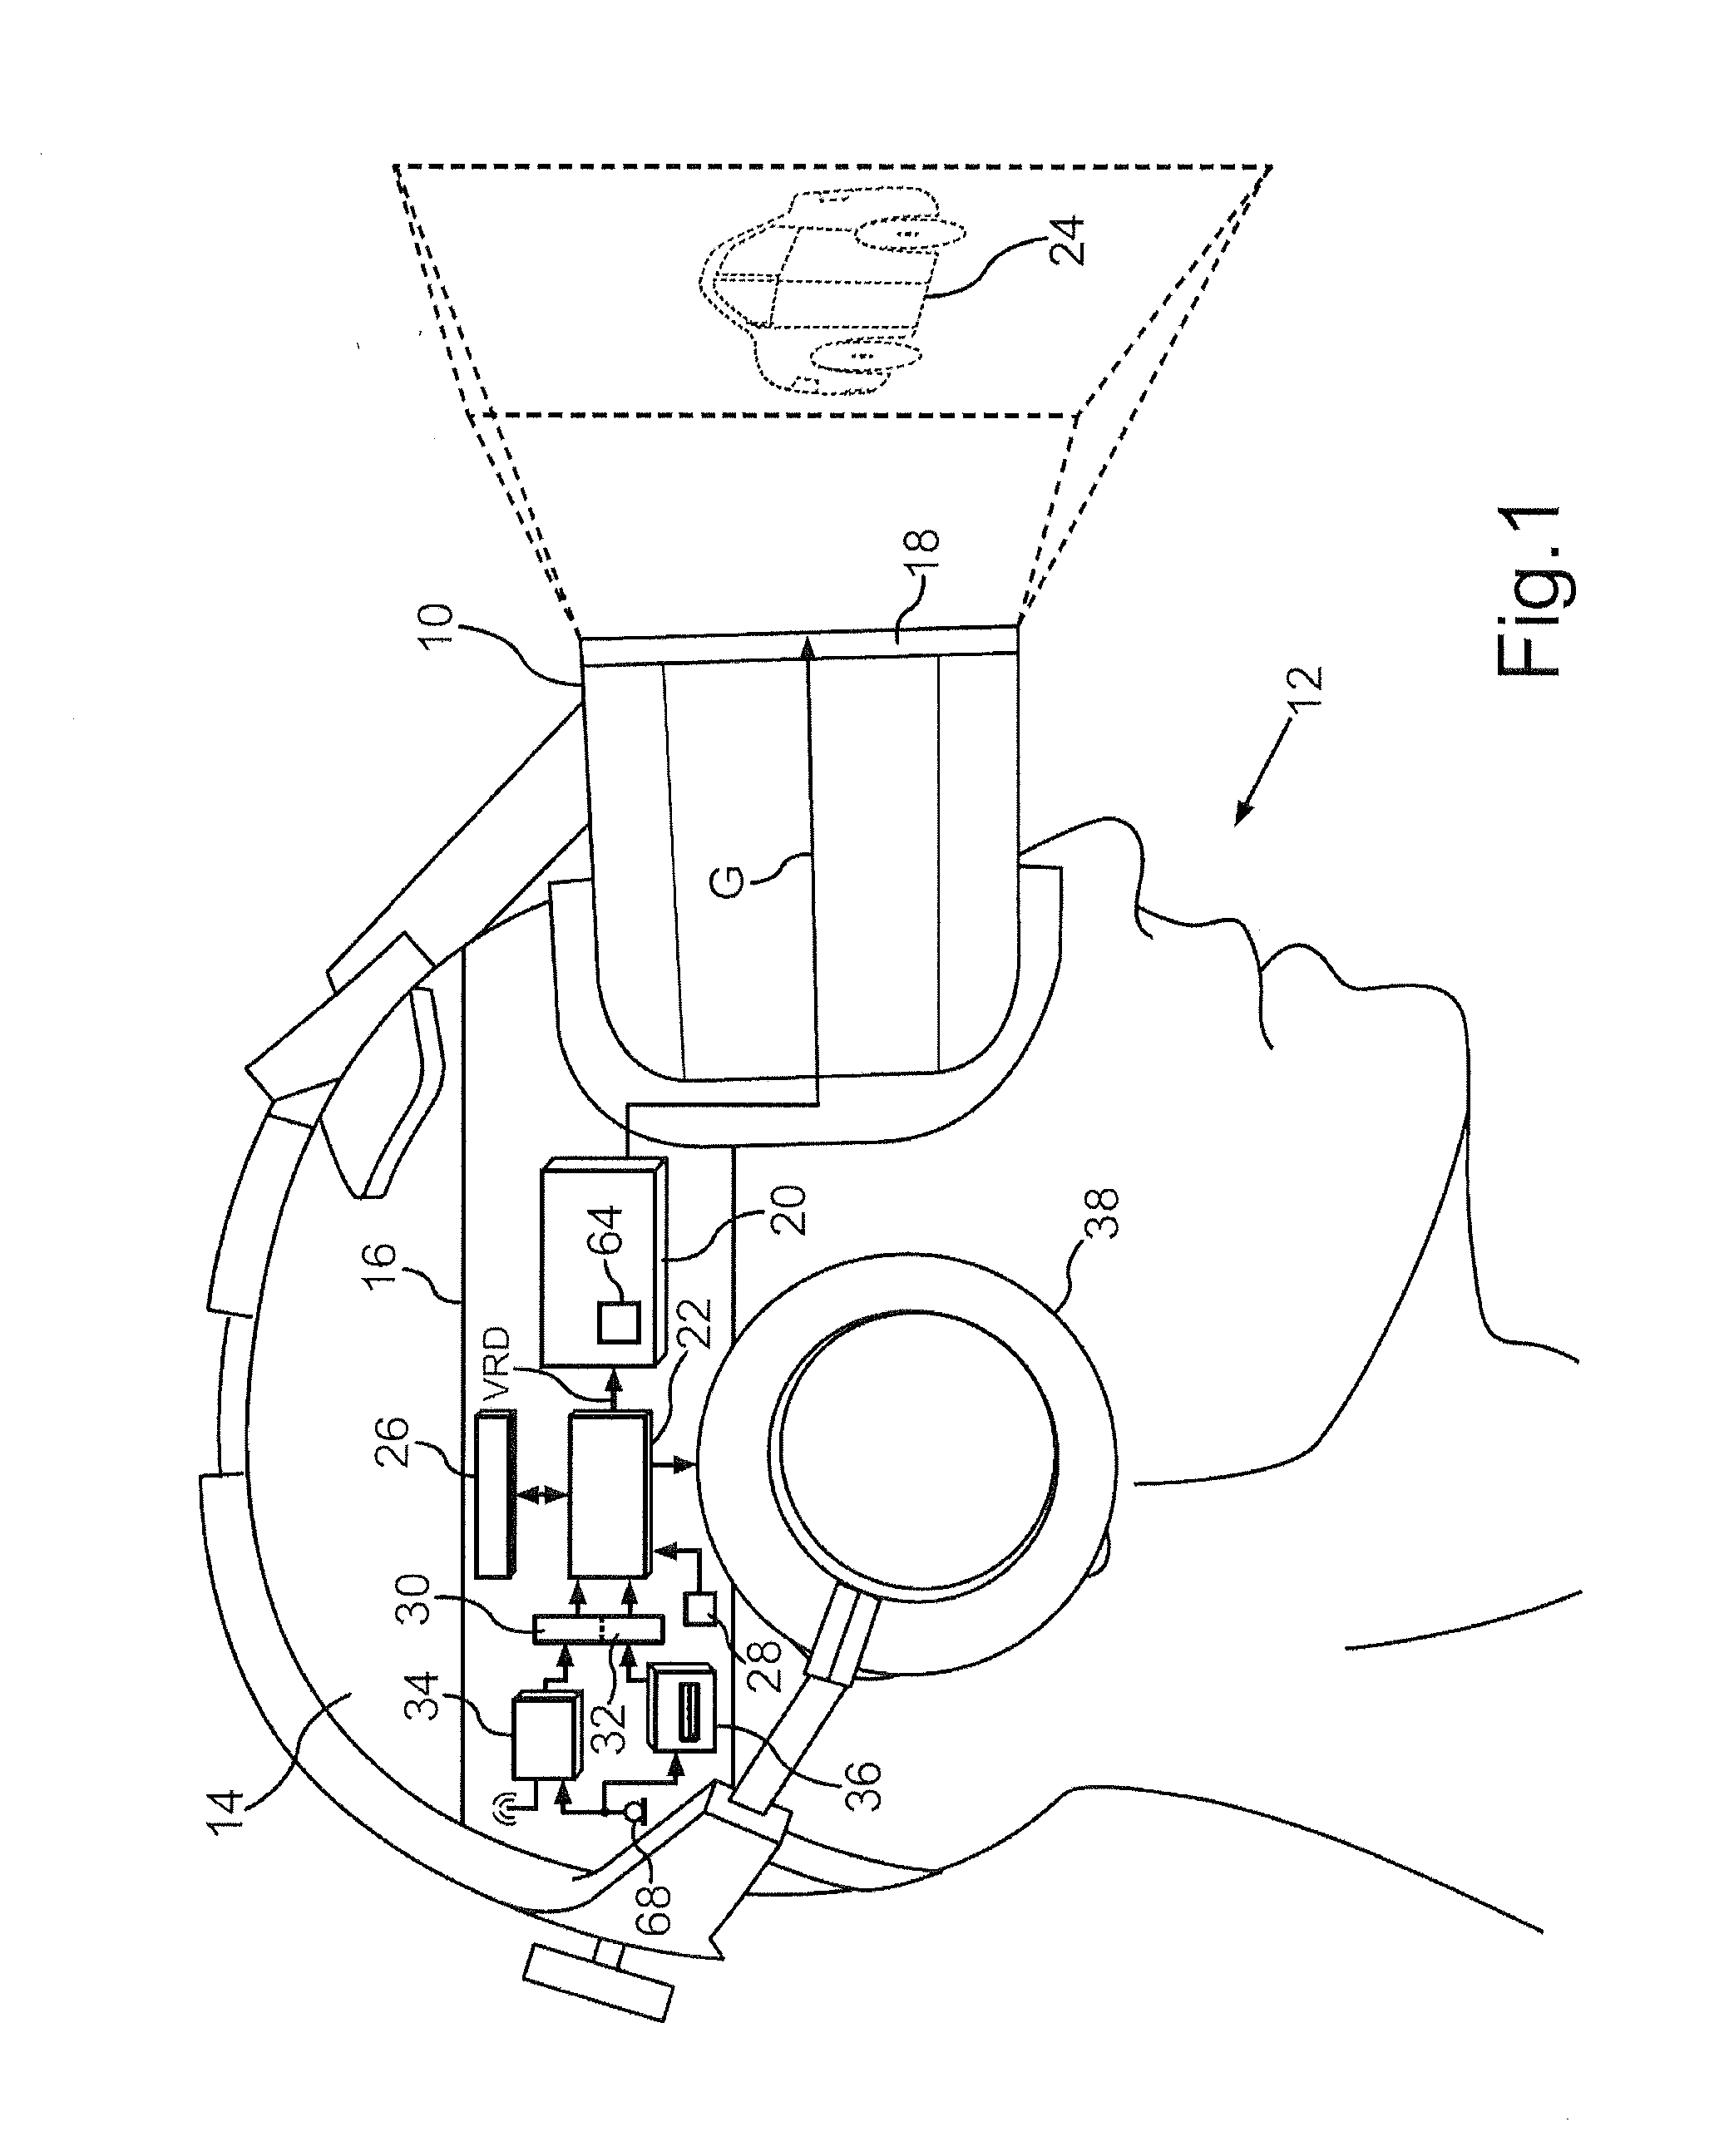 Presentation device for carrying out a product presentation